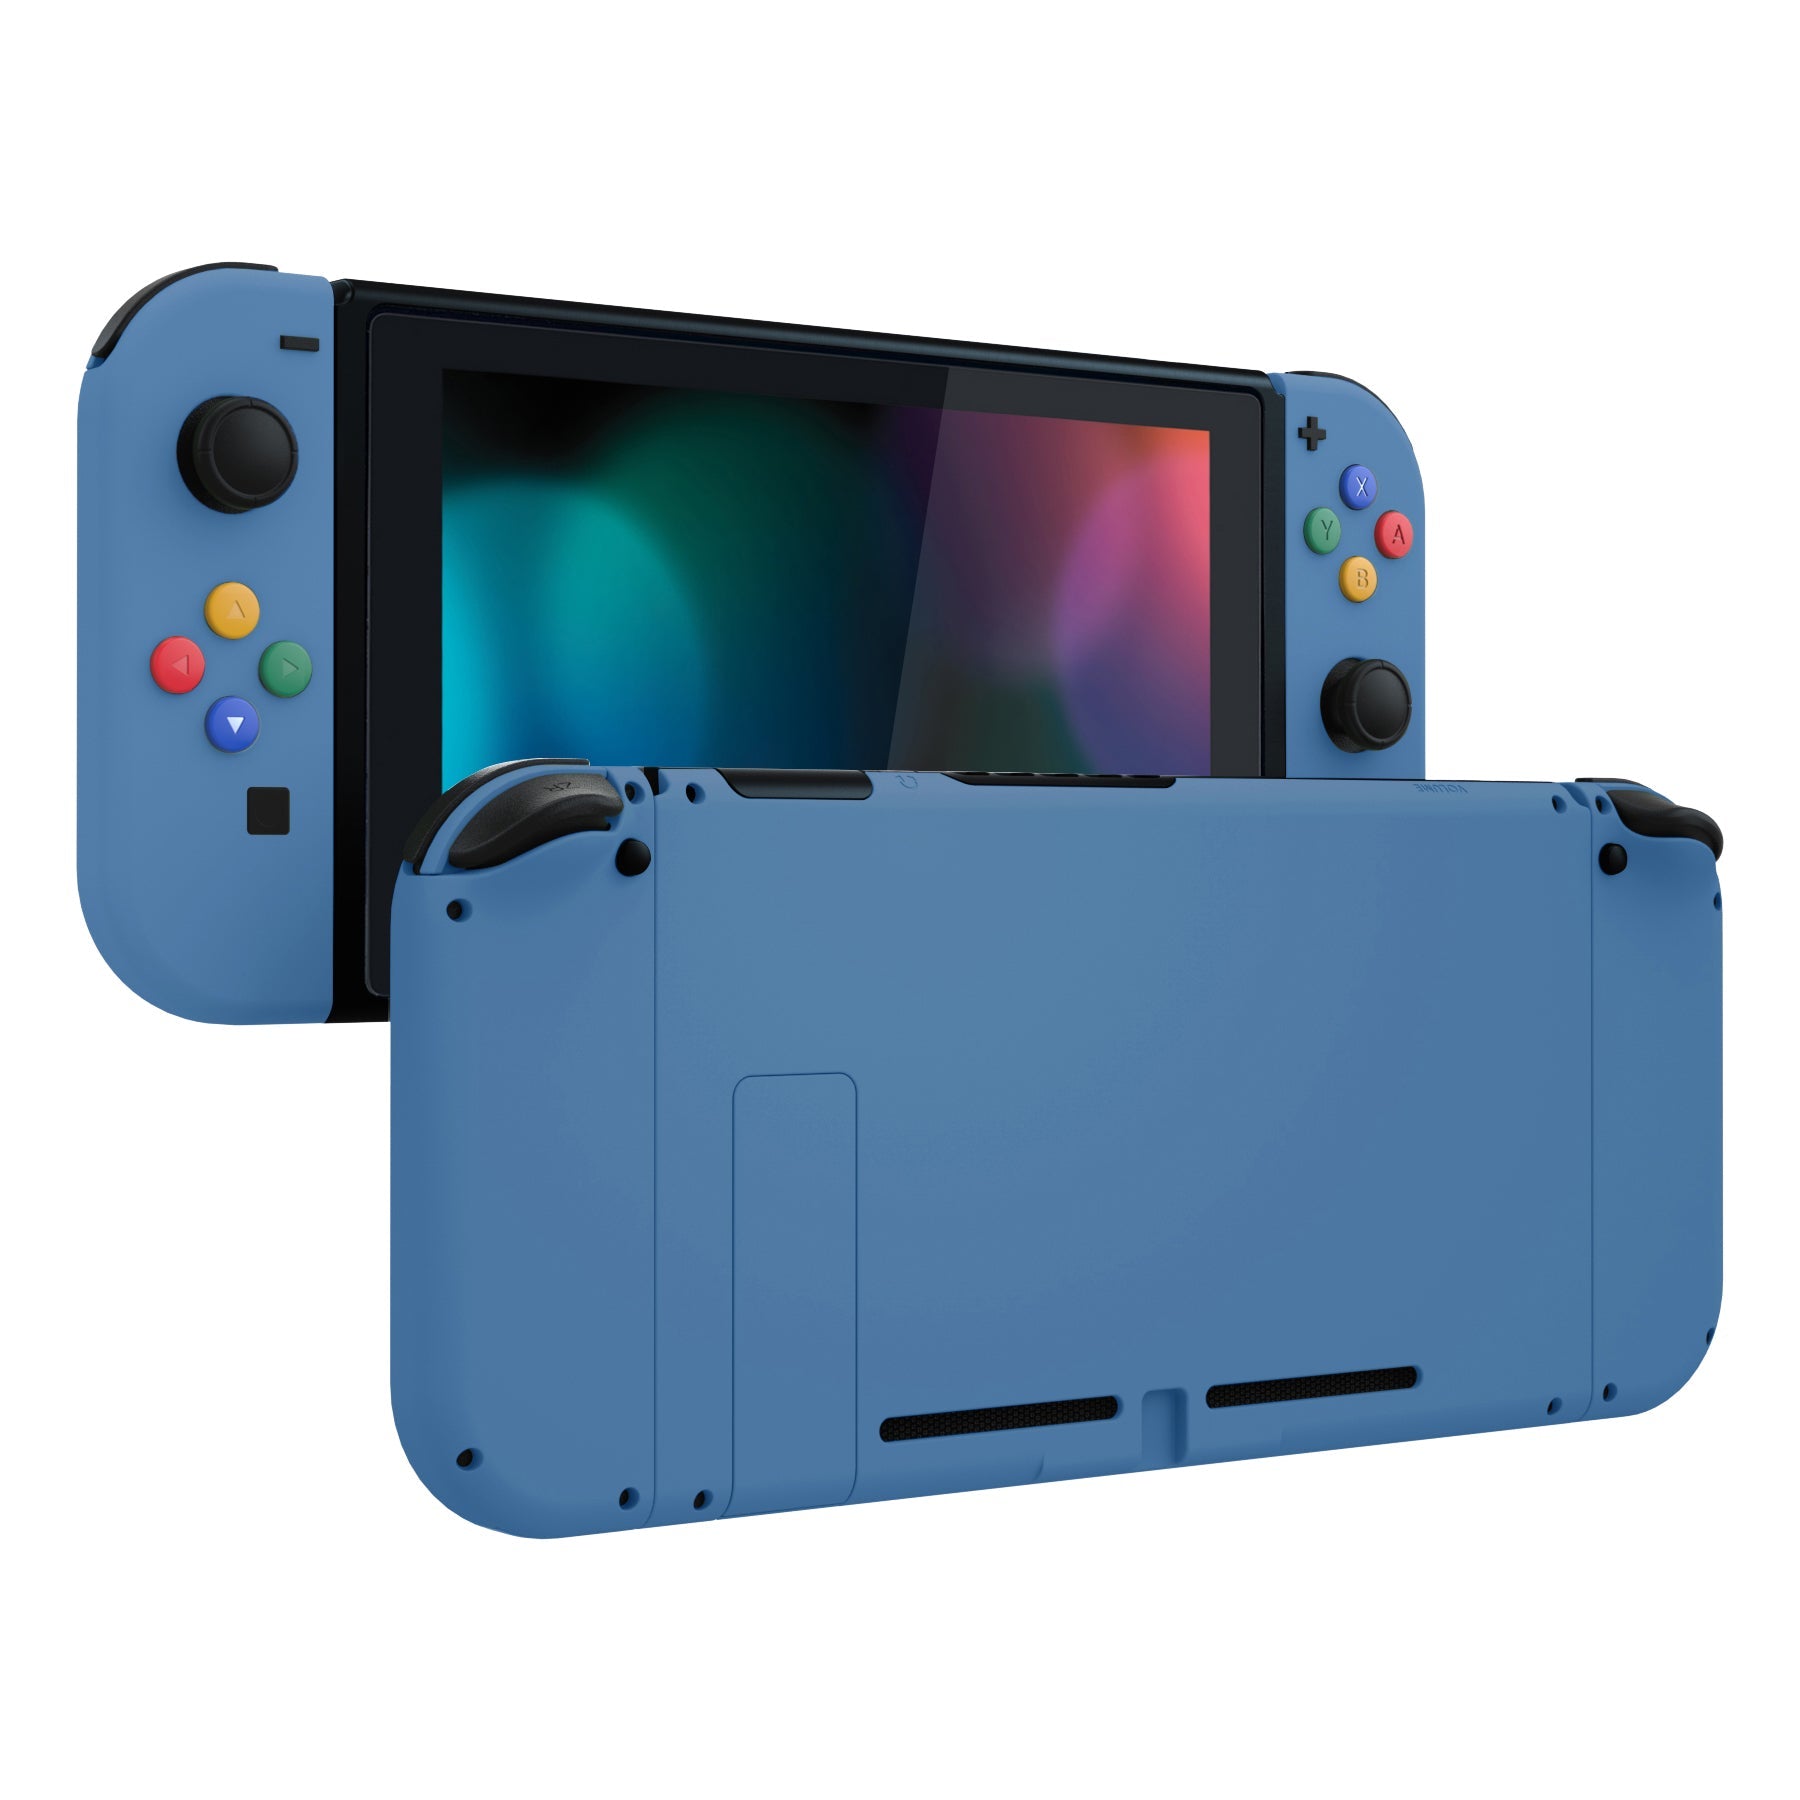 eXtremeRate Retail Airforce Blue Soft Touch Grip Backplate for NS Switch Console, NS Joycon Handheld Controller Housing with Full Set Buttons, DIY Replacement Shell for NS Switch - QP340